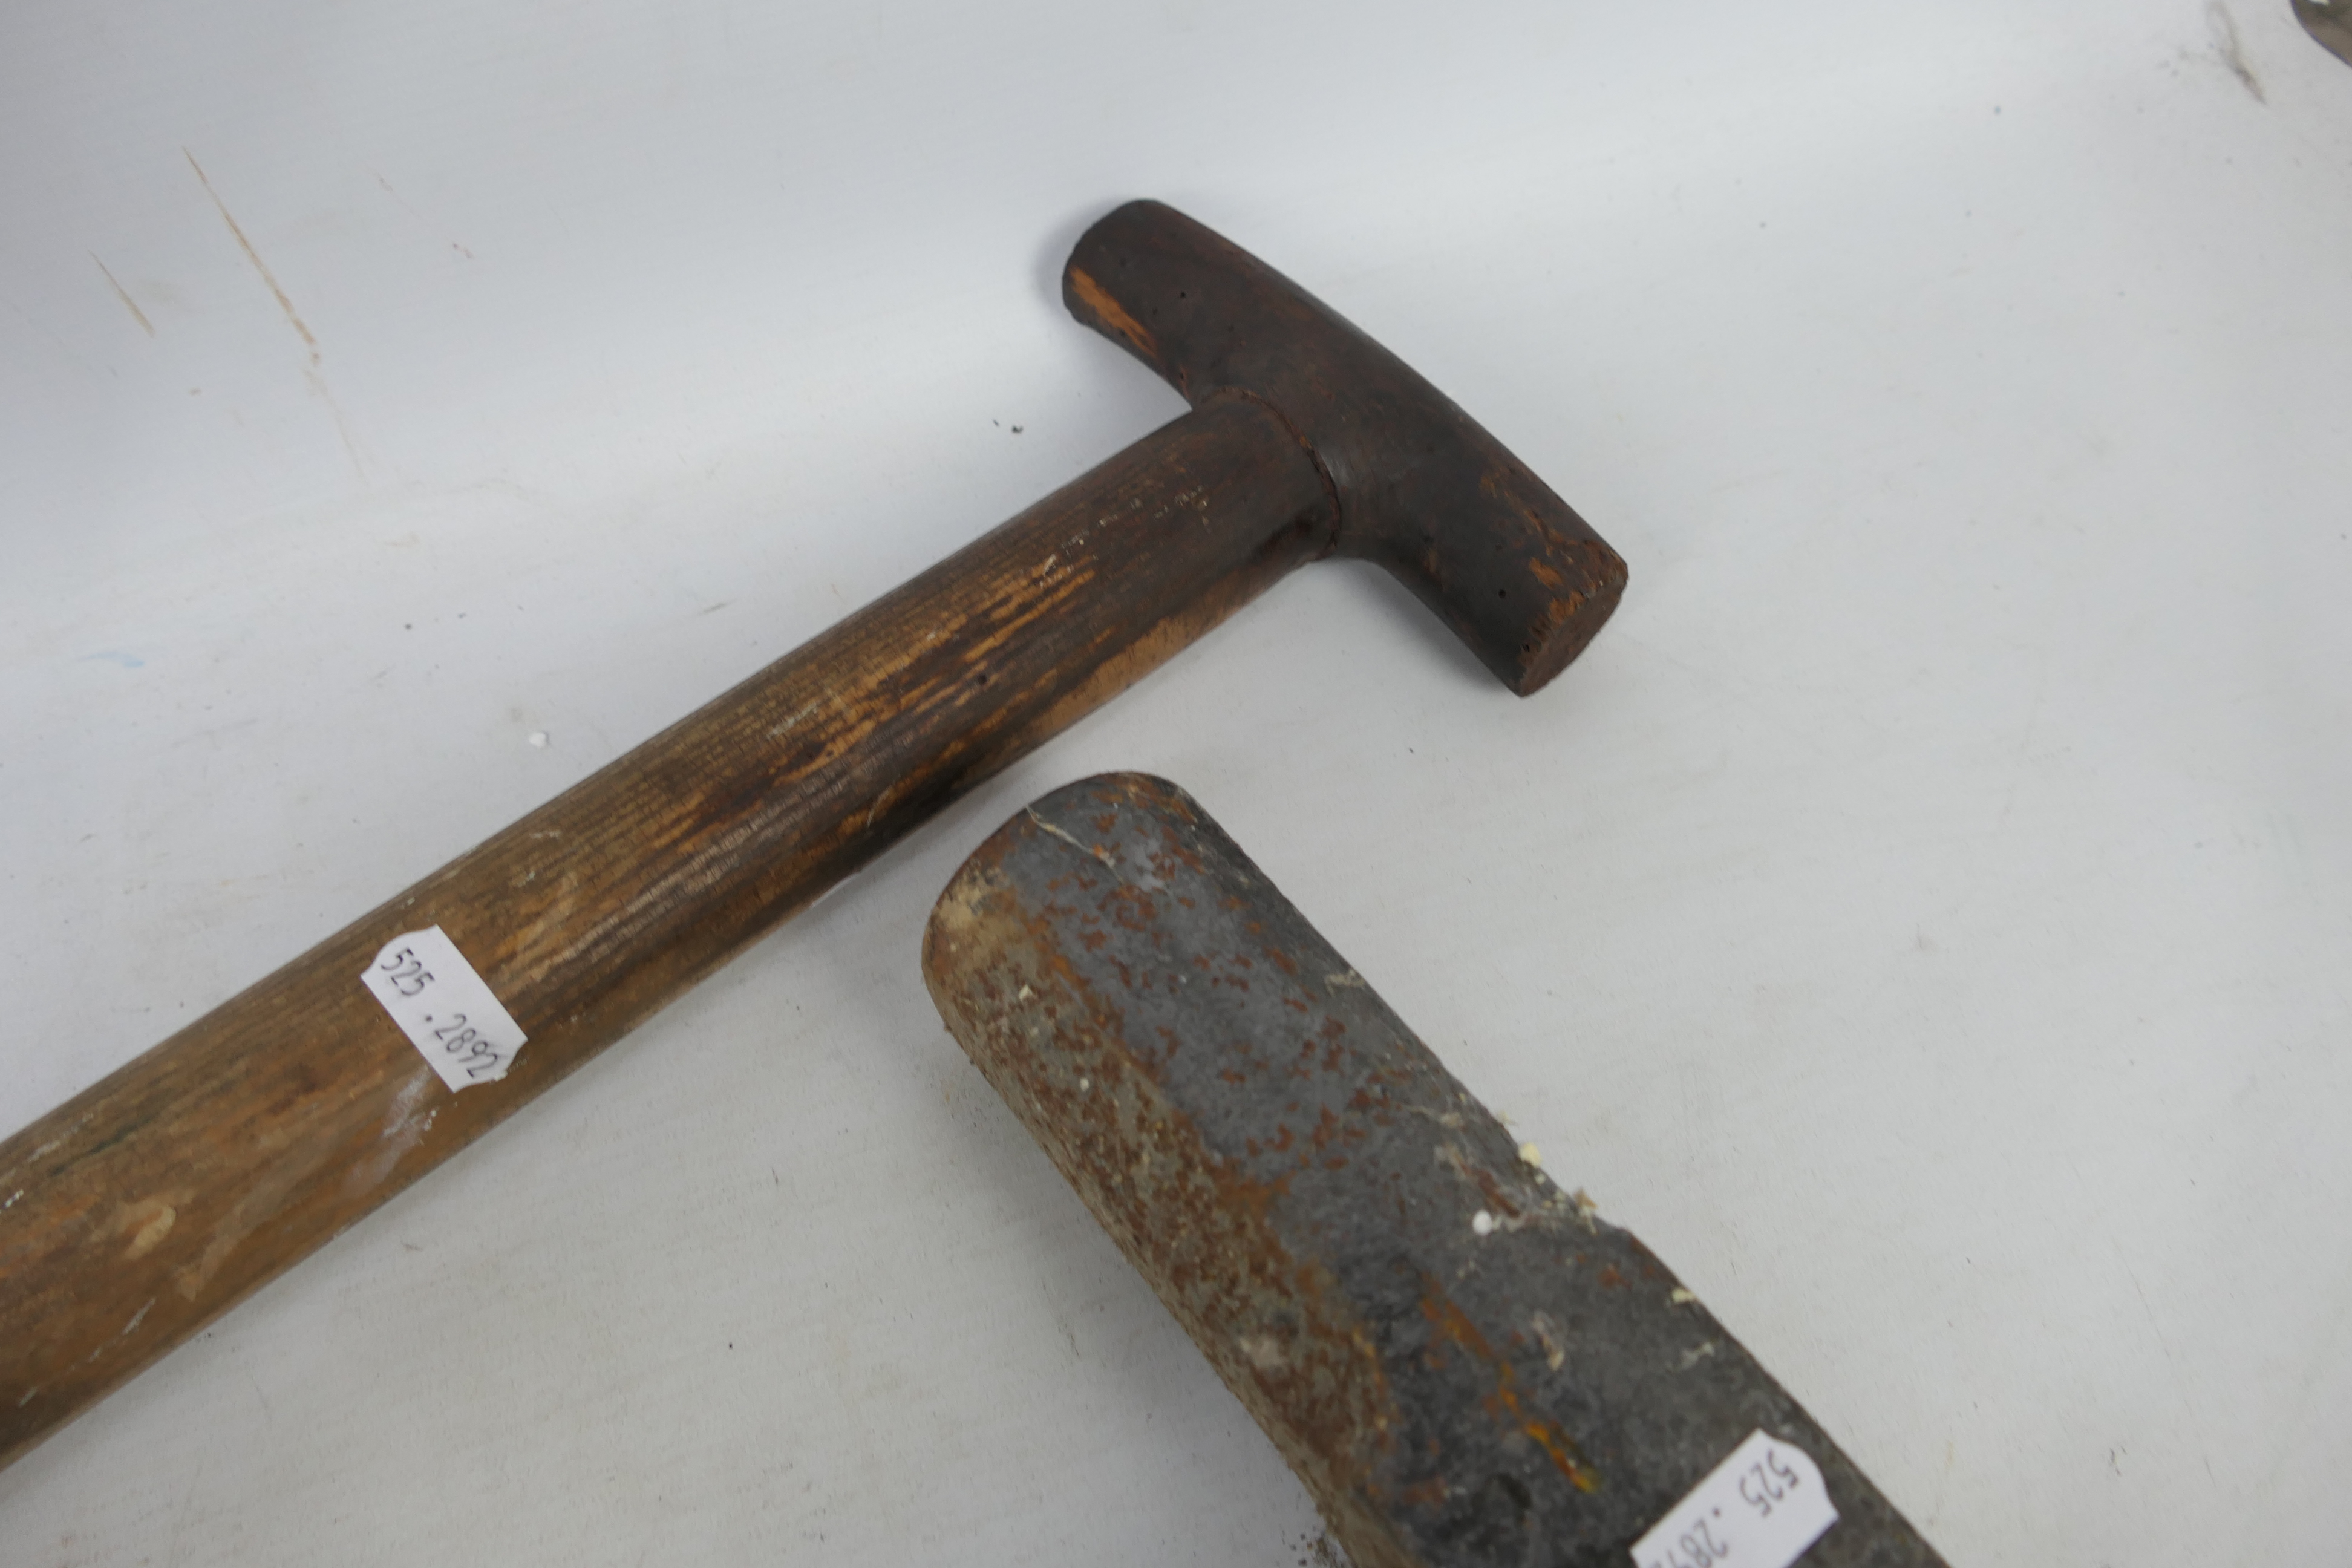 A vintage firing shovel and platelayer's keying hammer (handle 85 cm length). - Image 4 of 4